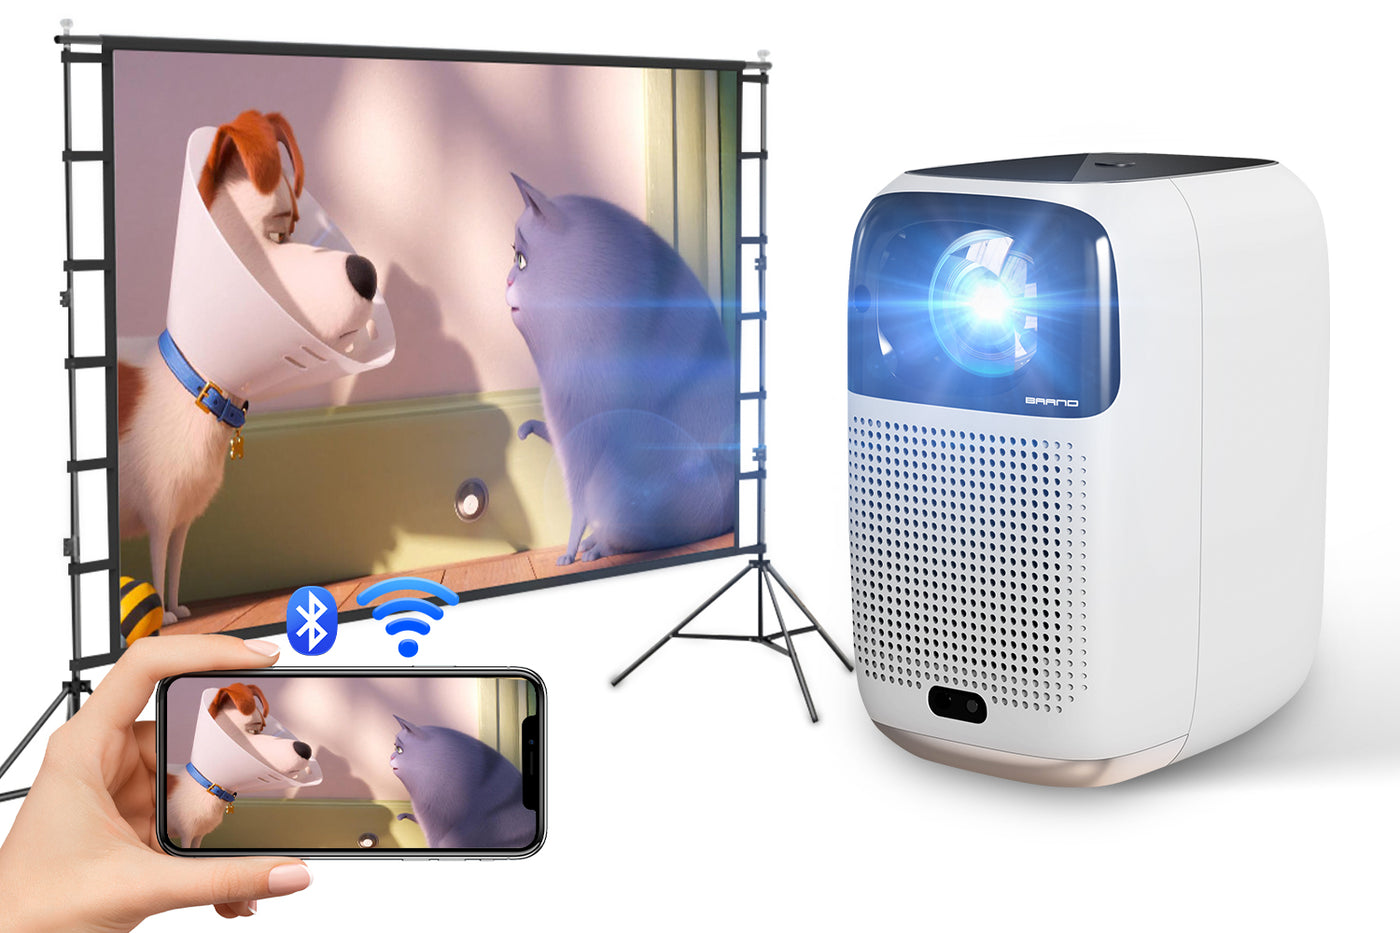 1080p WiFi Bluetooth Portable Smart TV Projector with Projector Screen and Stand, Support 4K, 4D 4P Keystone, Digital Zoom